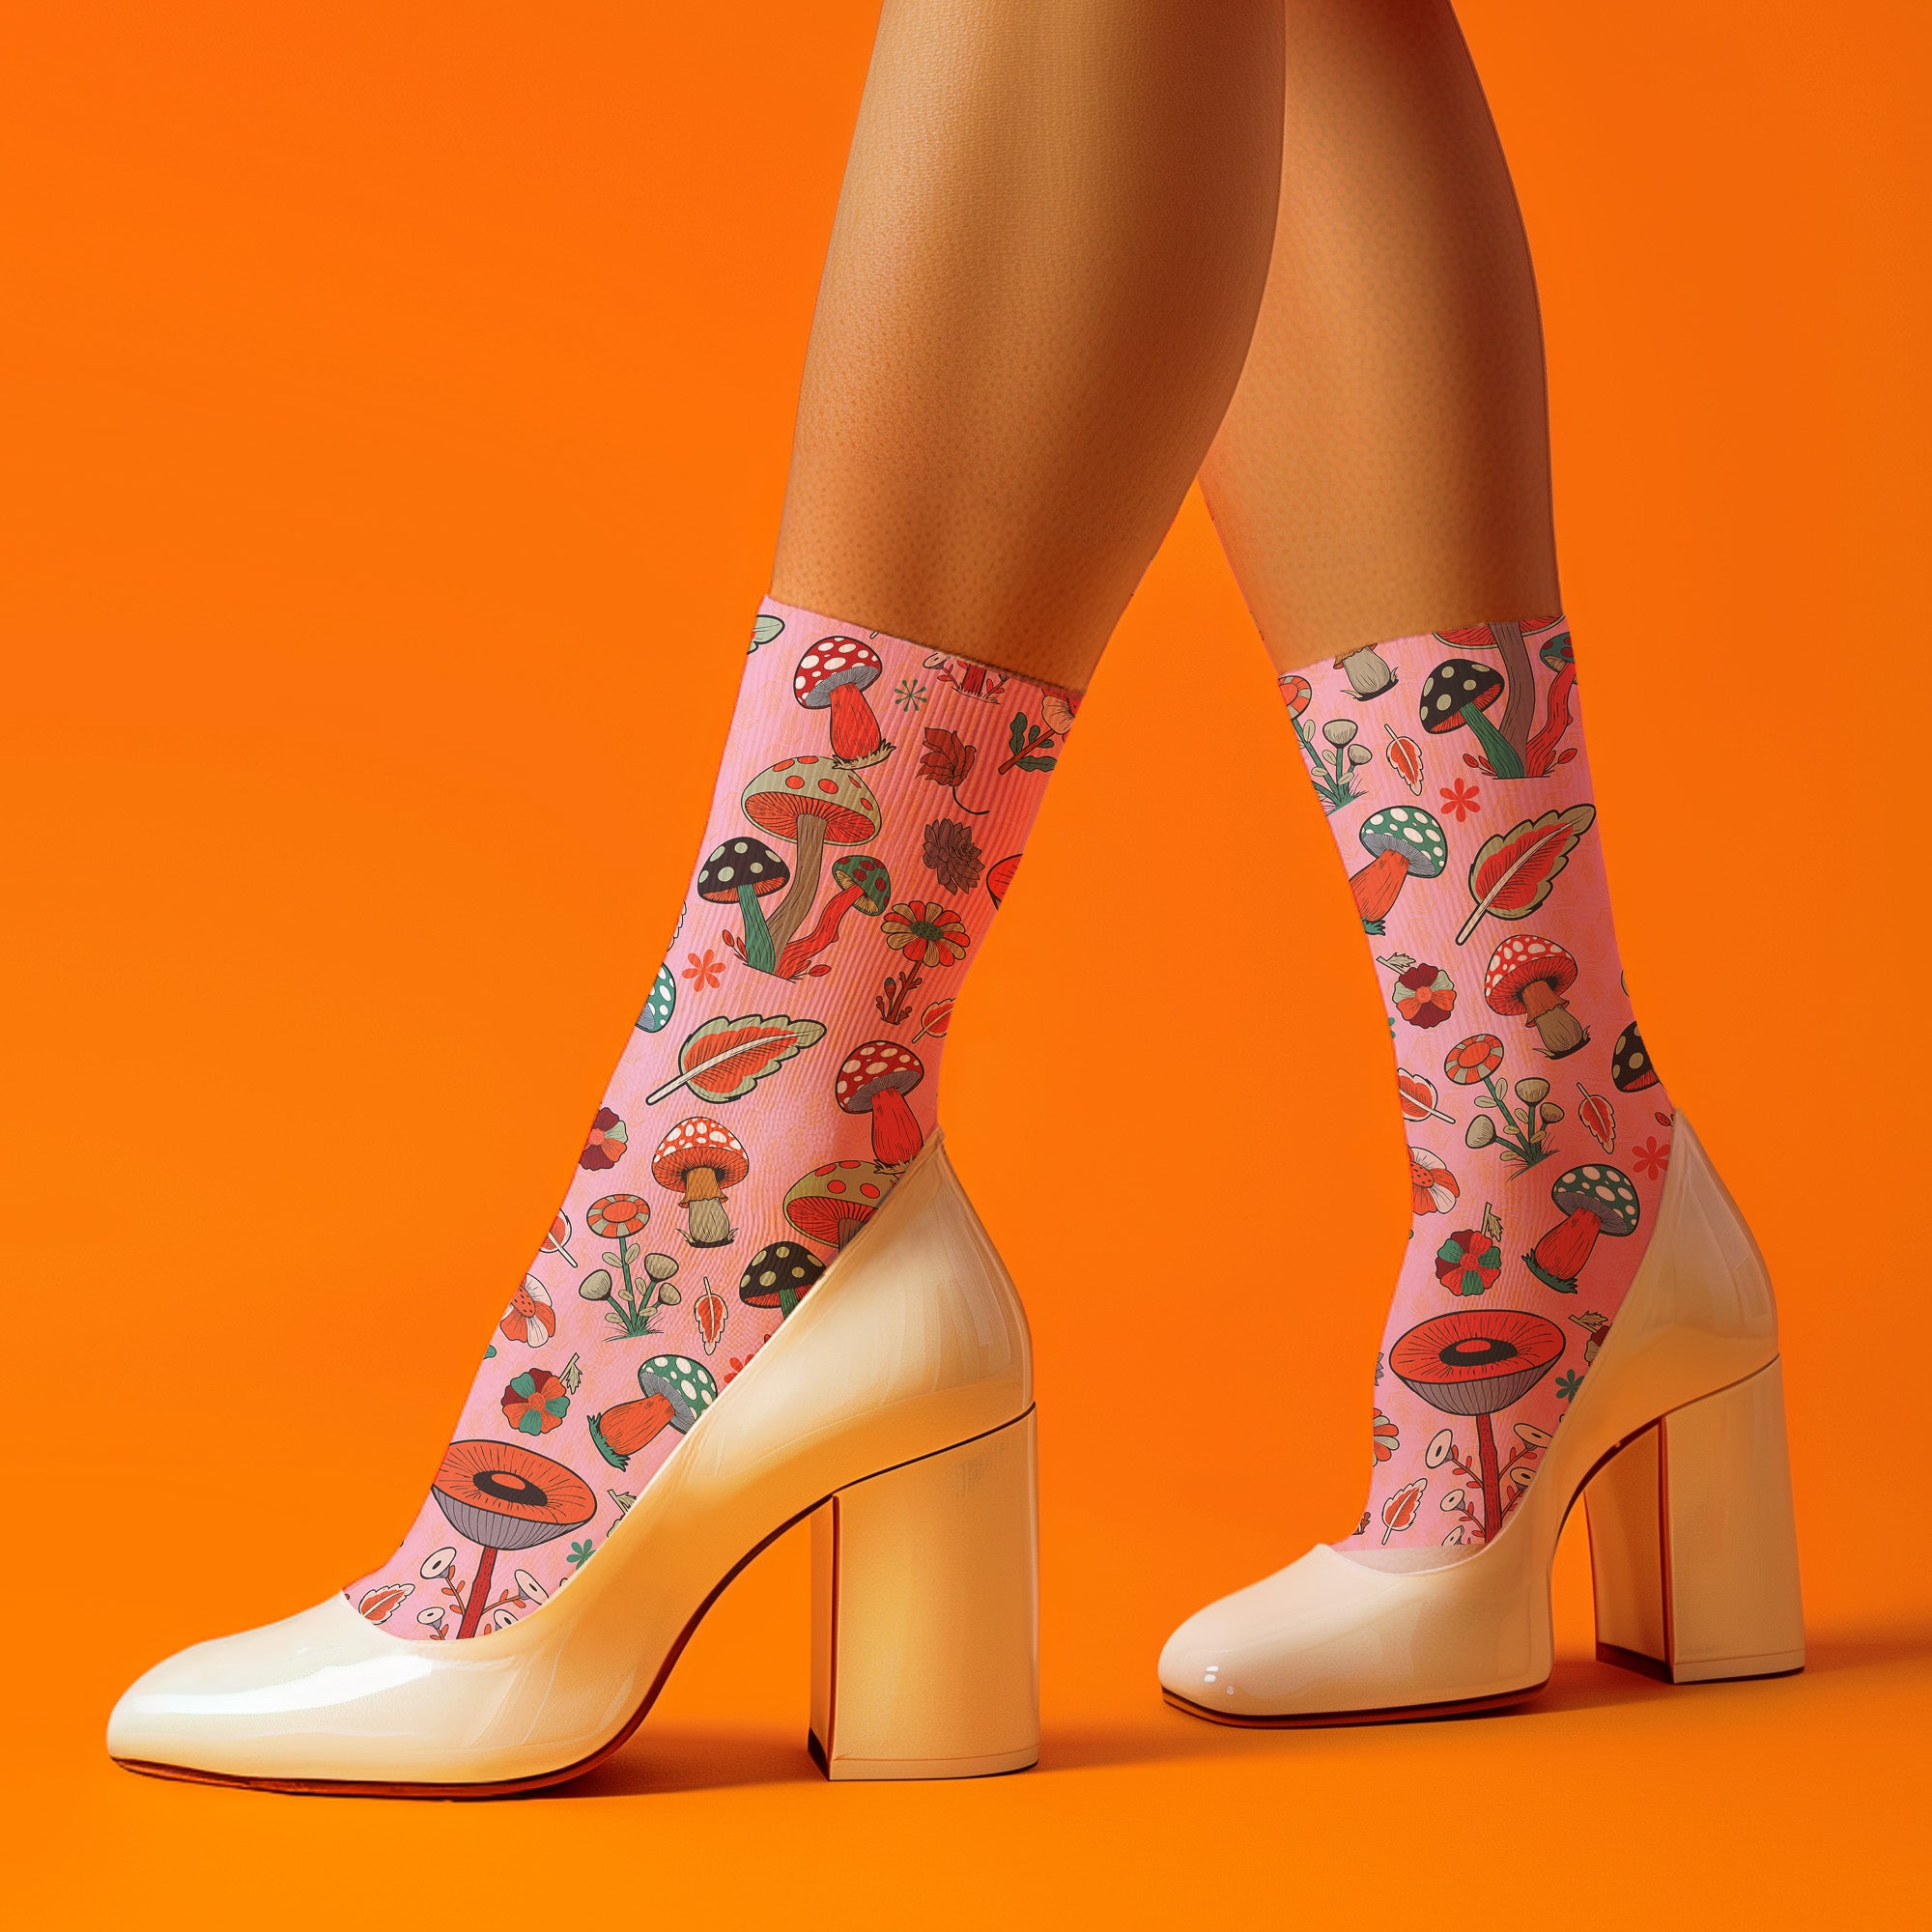 Cute mushroom-themed pink socks with various fungi and nature illustrations, black heels and toes, ideal for casual wear or gifting